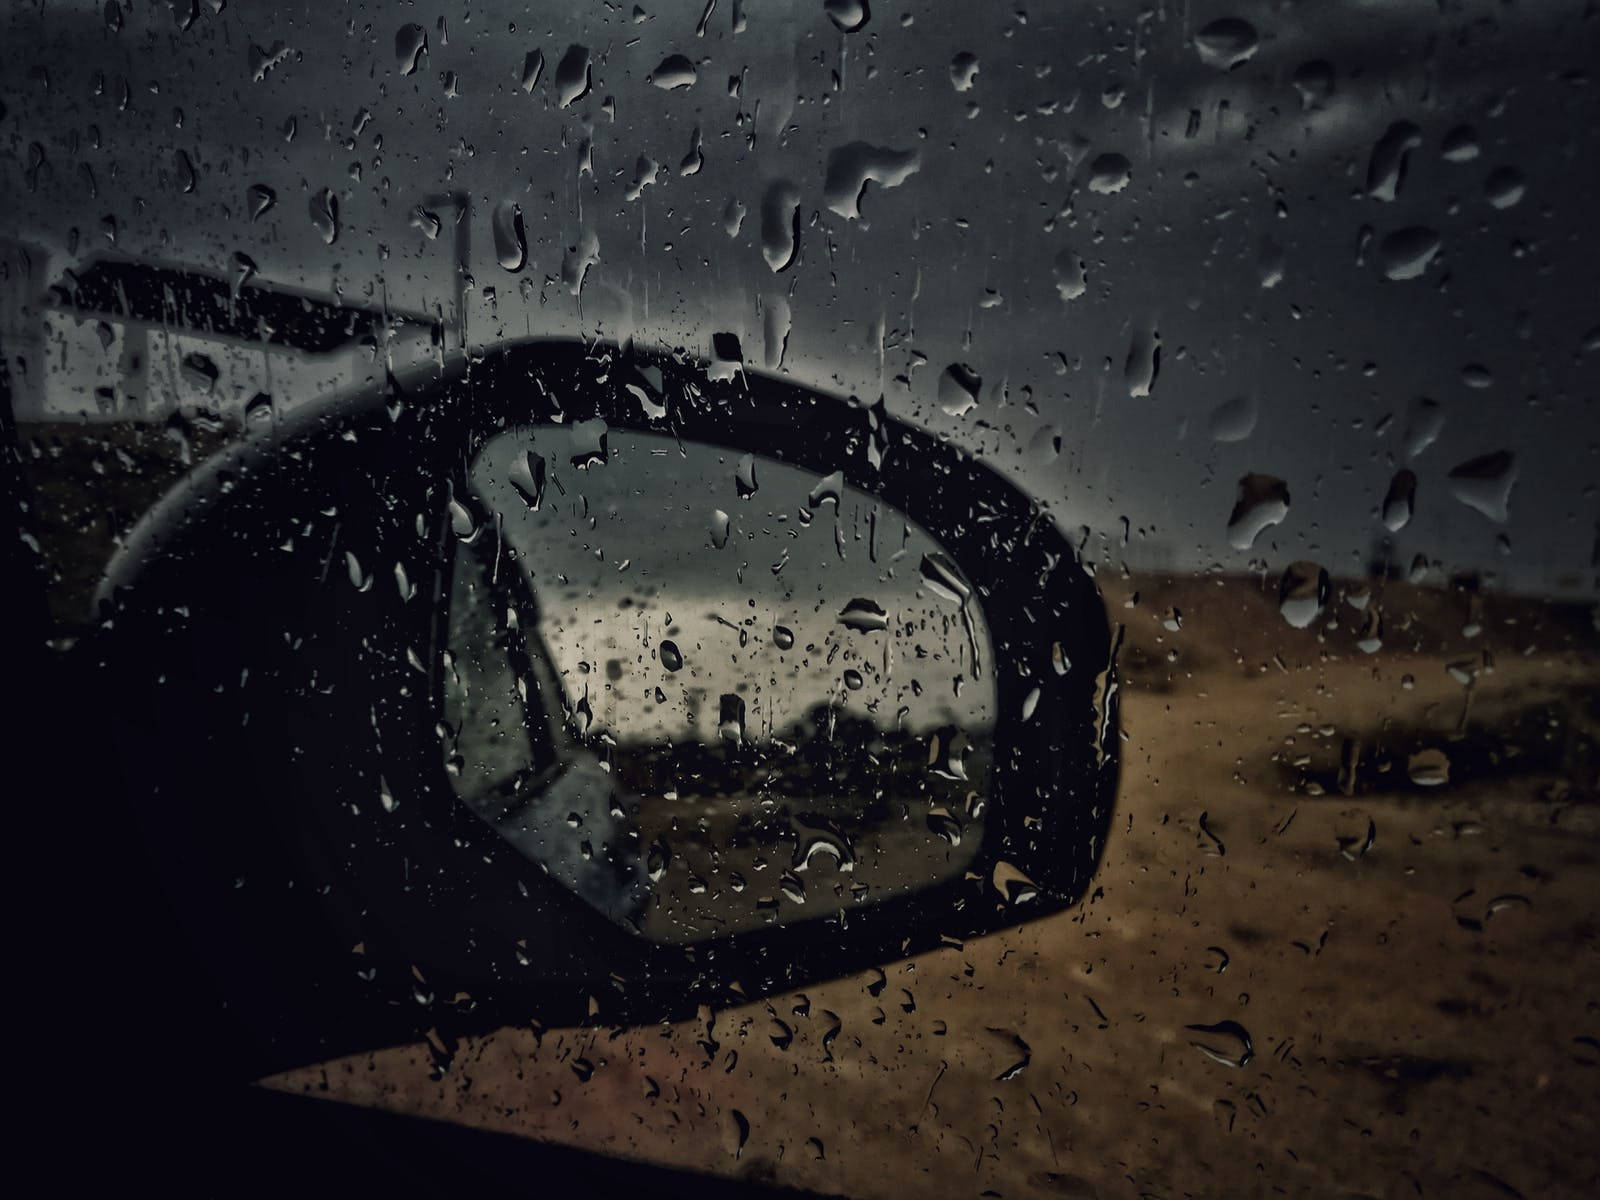 Dark And Raining Outside The Car